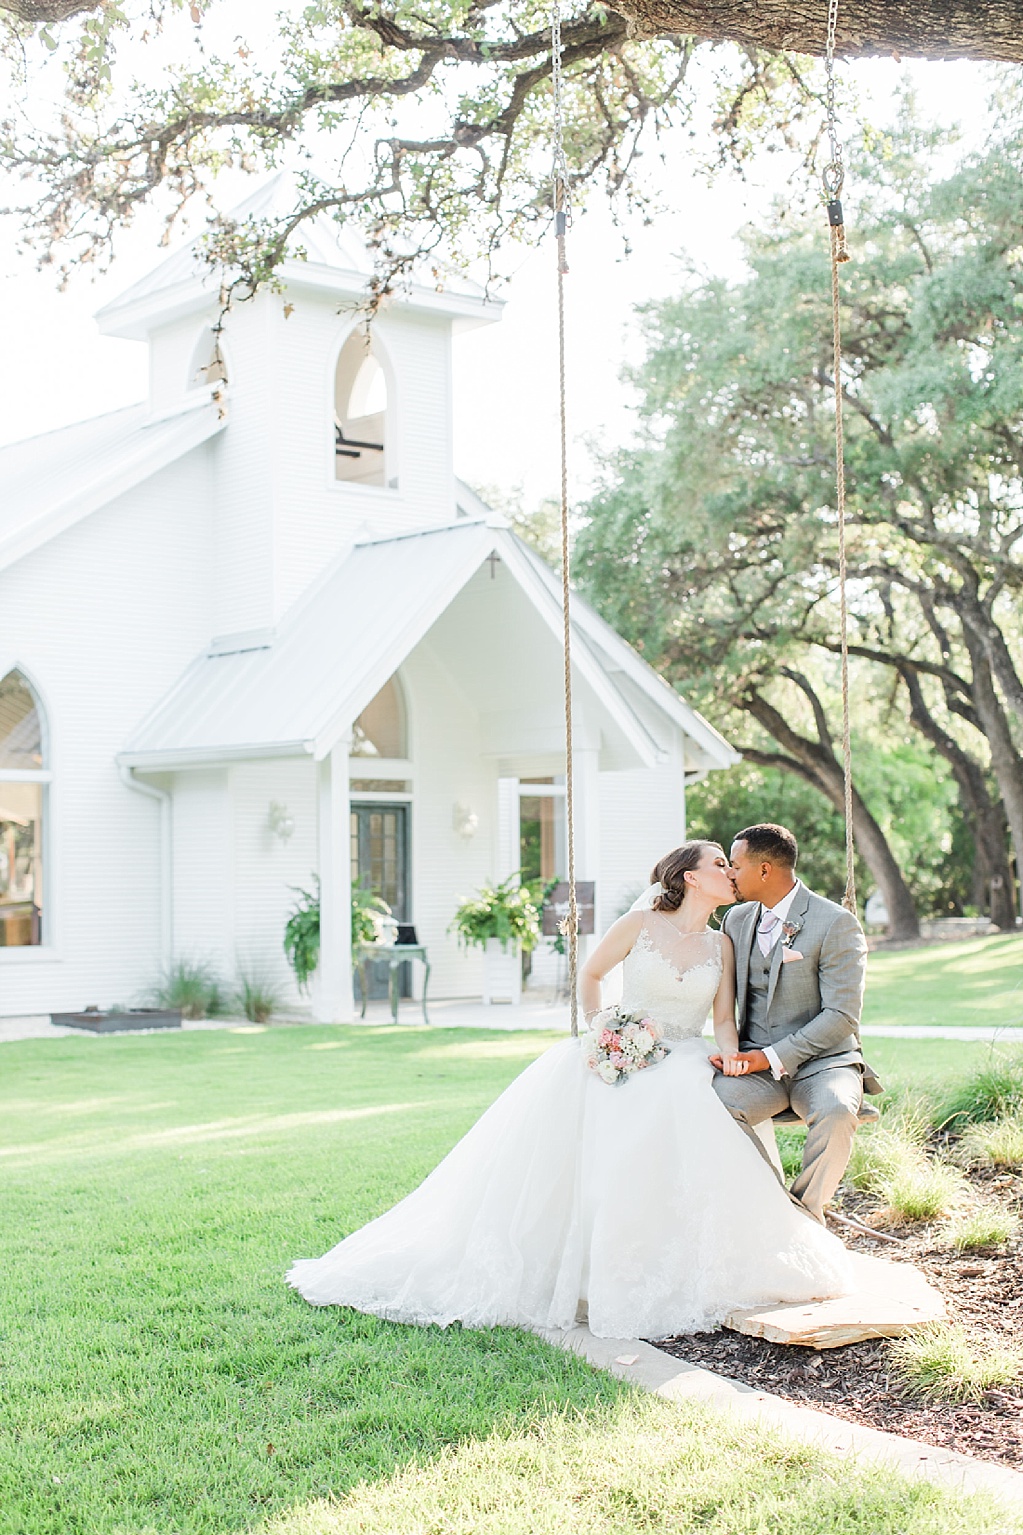 A Blush Vintage Summer Wedding at The Chandelier of Gruene in New Braunfels Texas by Allison Jeffers Photography 0106